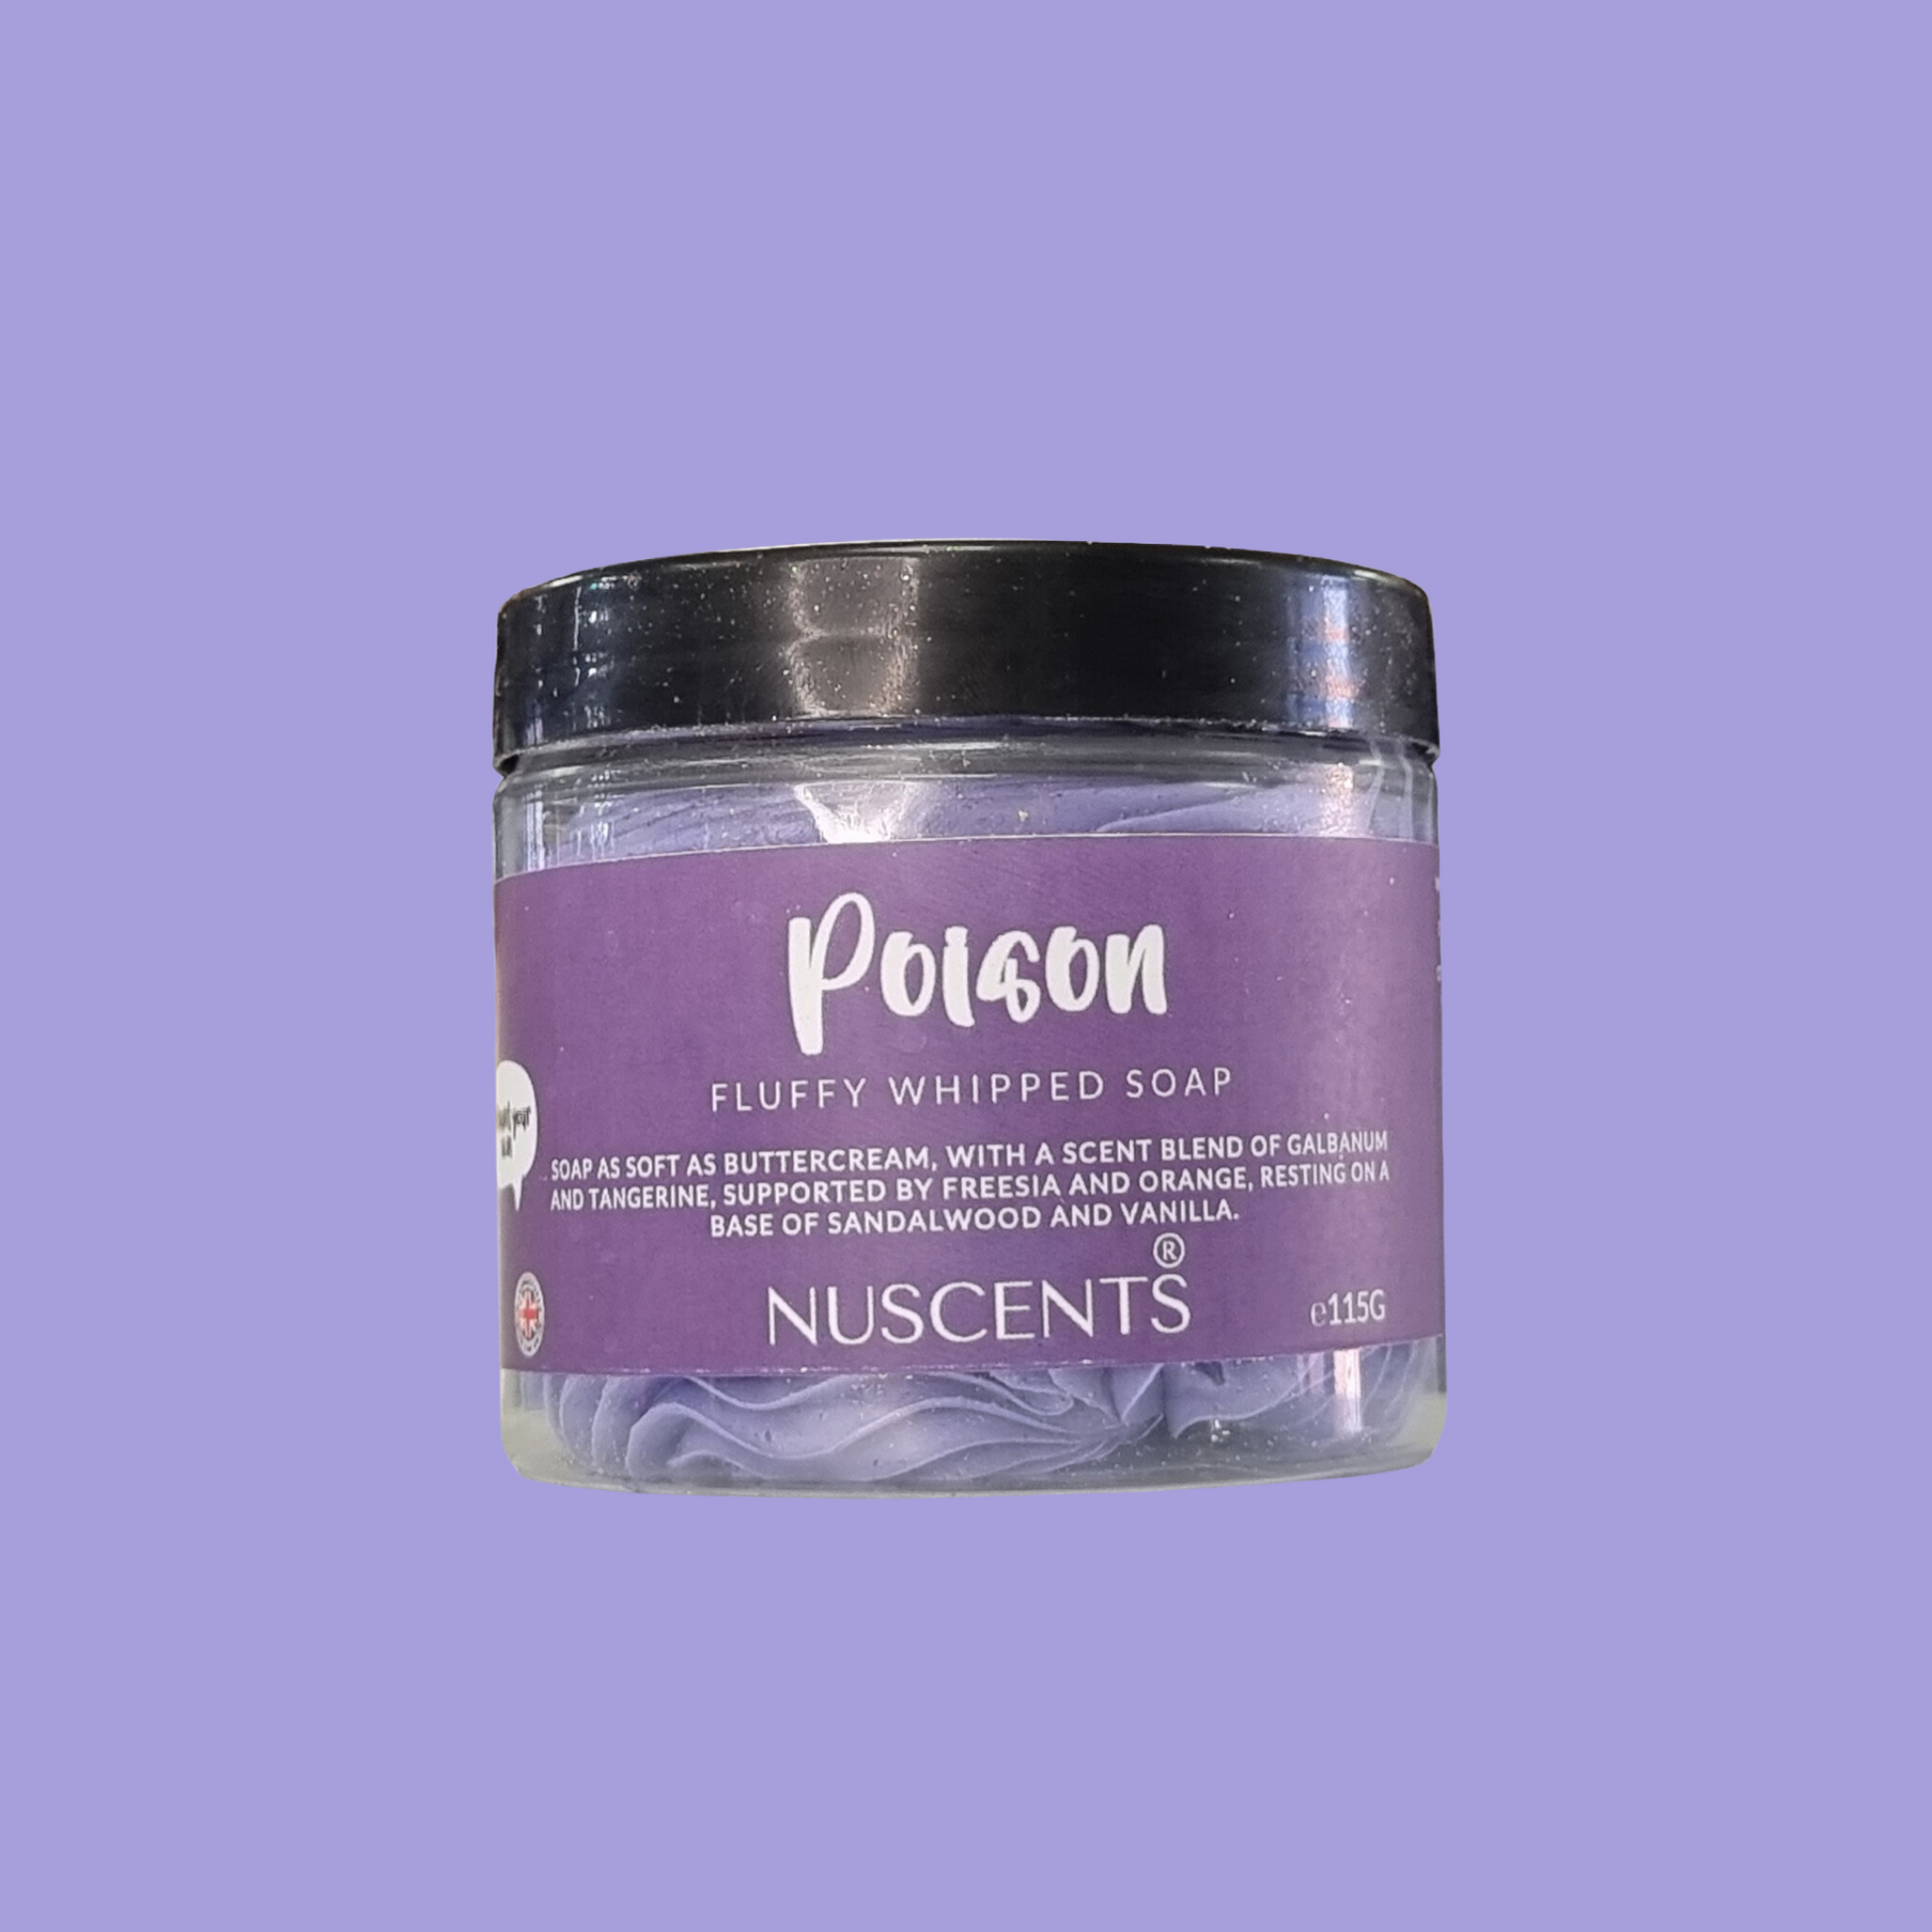 Poison Whipped Soap